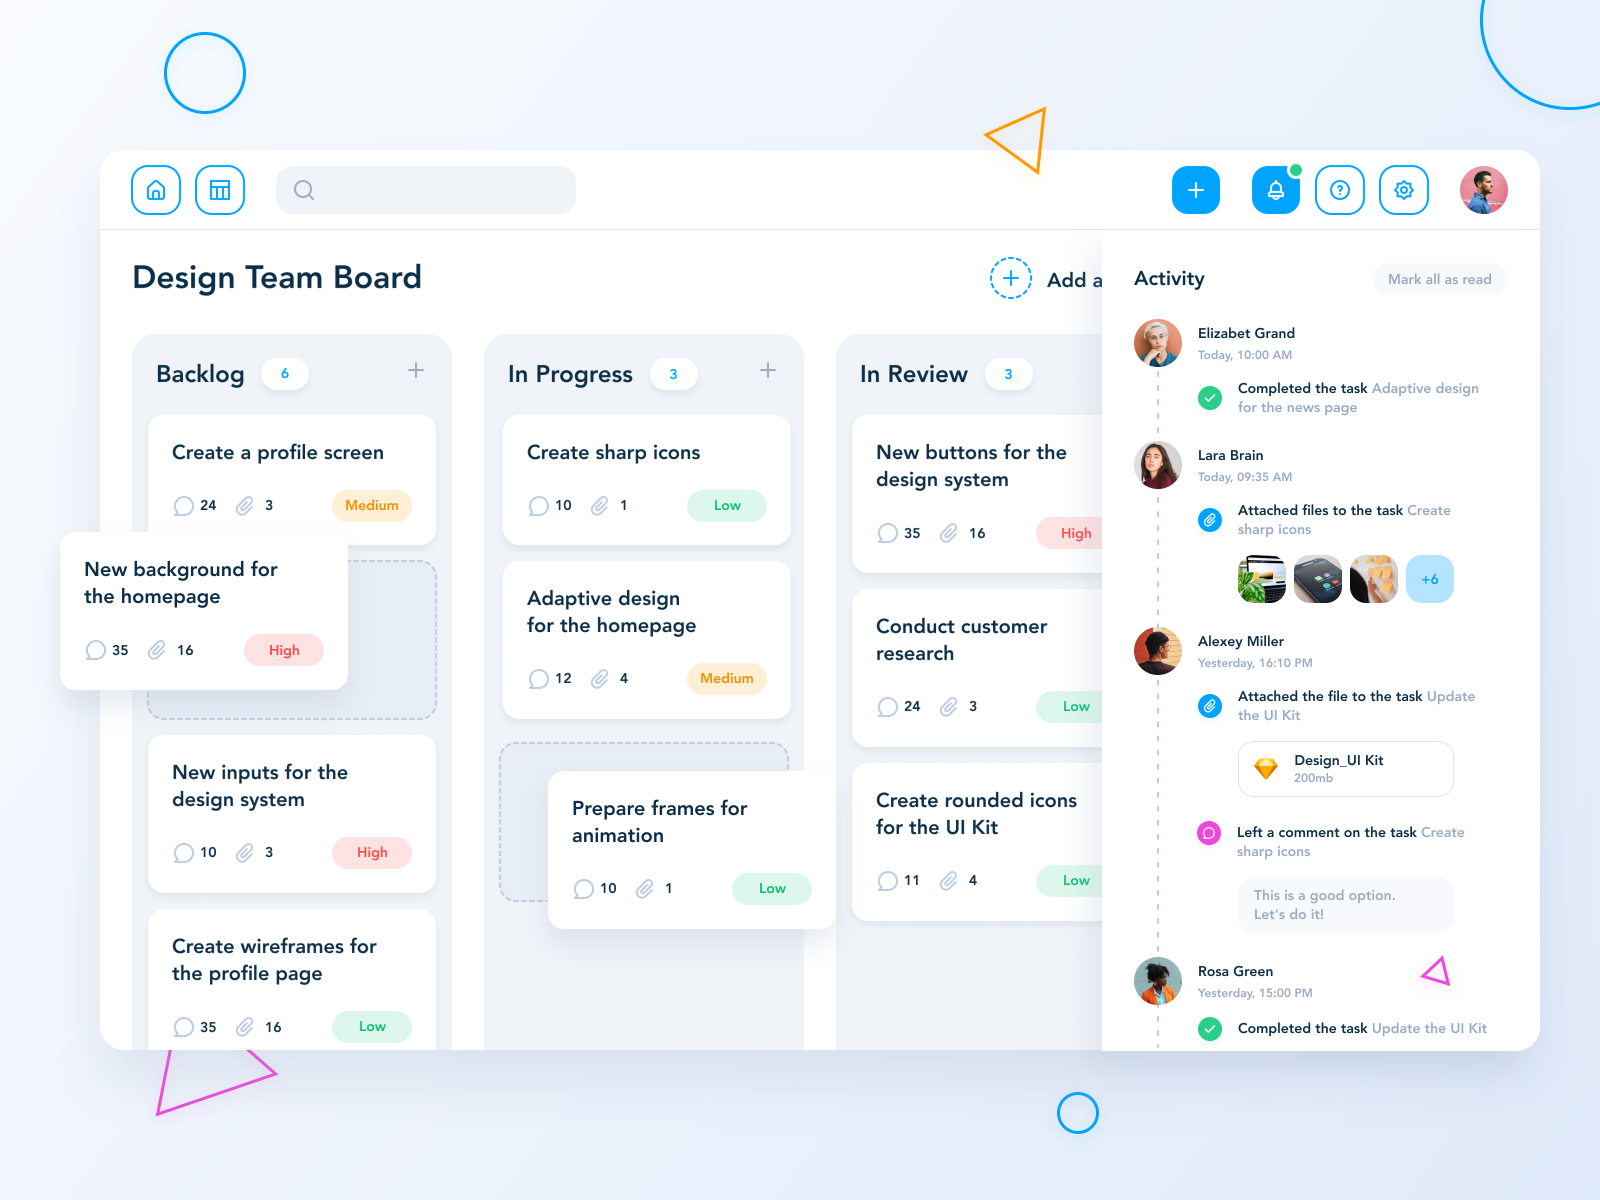 Task Manager Dashboard by Alena Zhukava on Dribbble